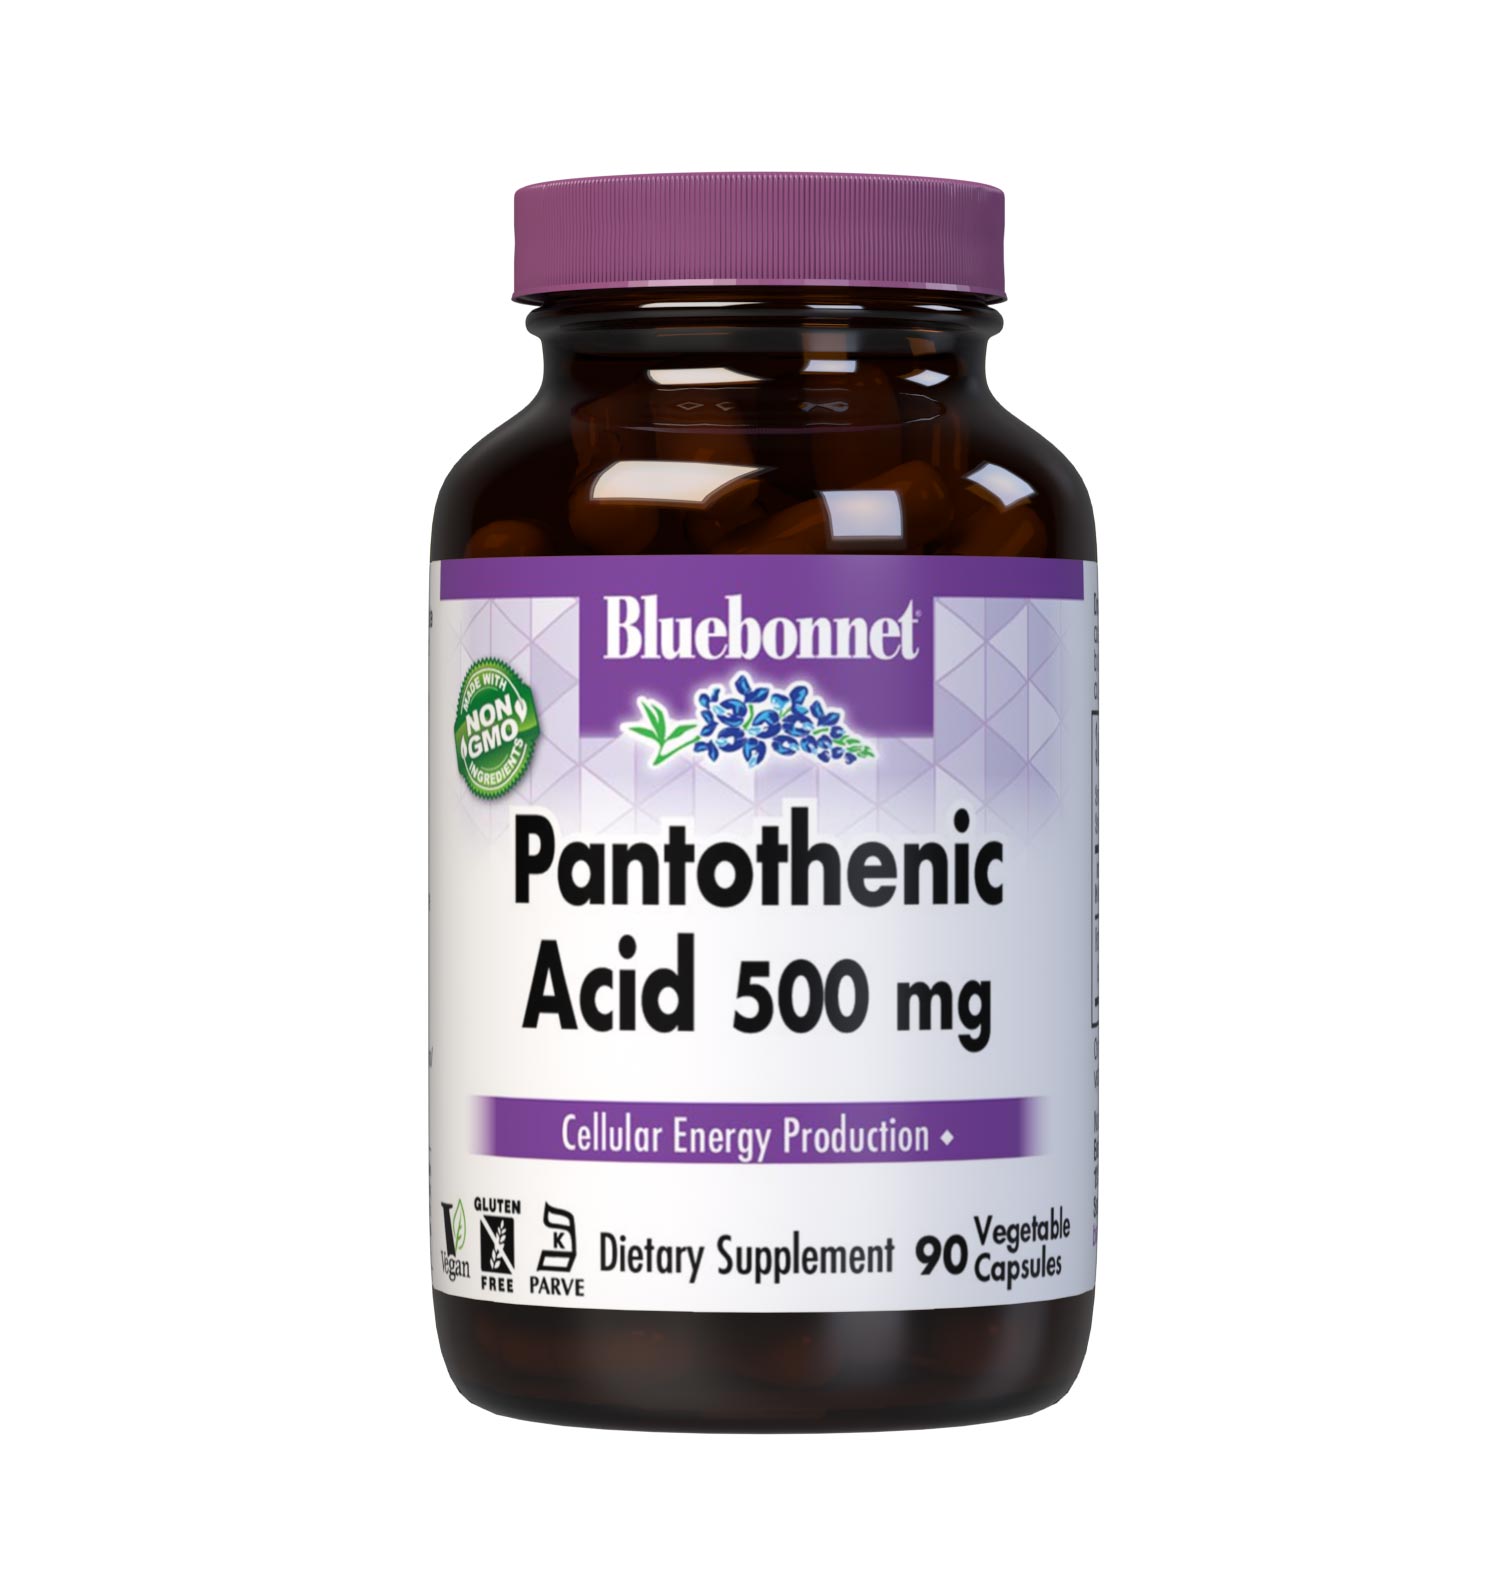 Bluebonnet’s Pantothenic Acid 500 mg 90 Vegetable Capsules are formulated with pantothenic acid from calcium D-pantothenate. Tested for potency and purity in our own state-of-the-art laboratory. Pantothenic acid may support cellular energy production. #size_90 count